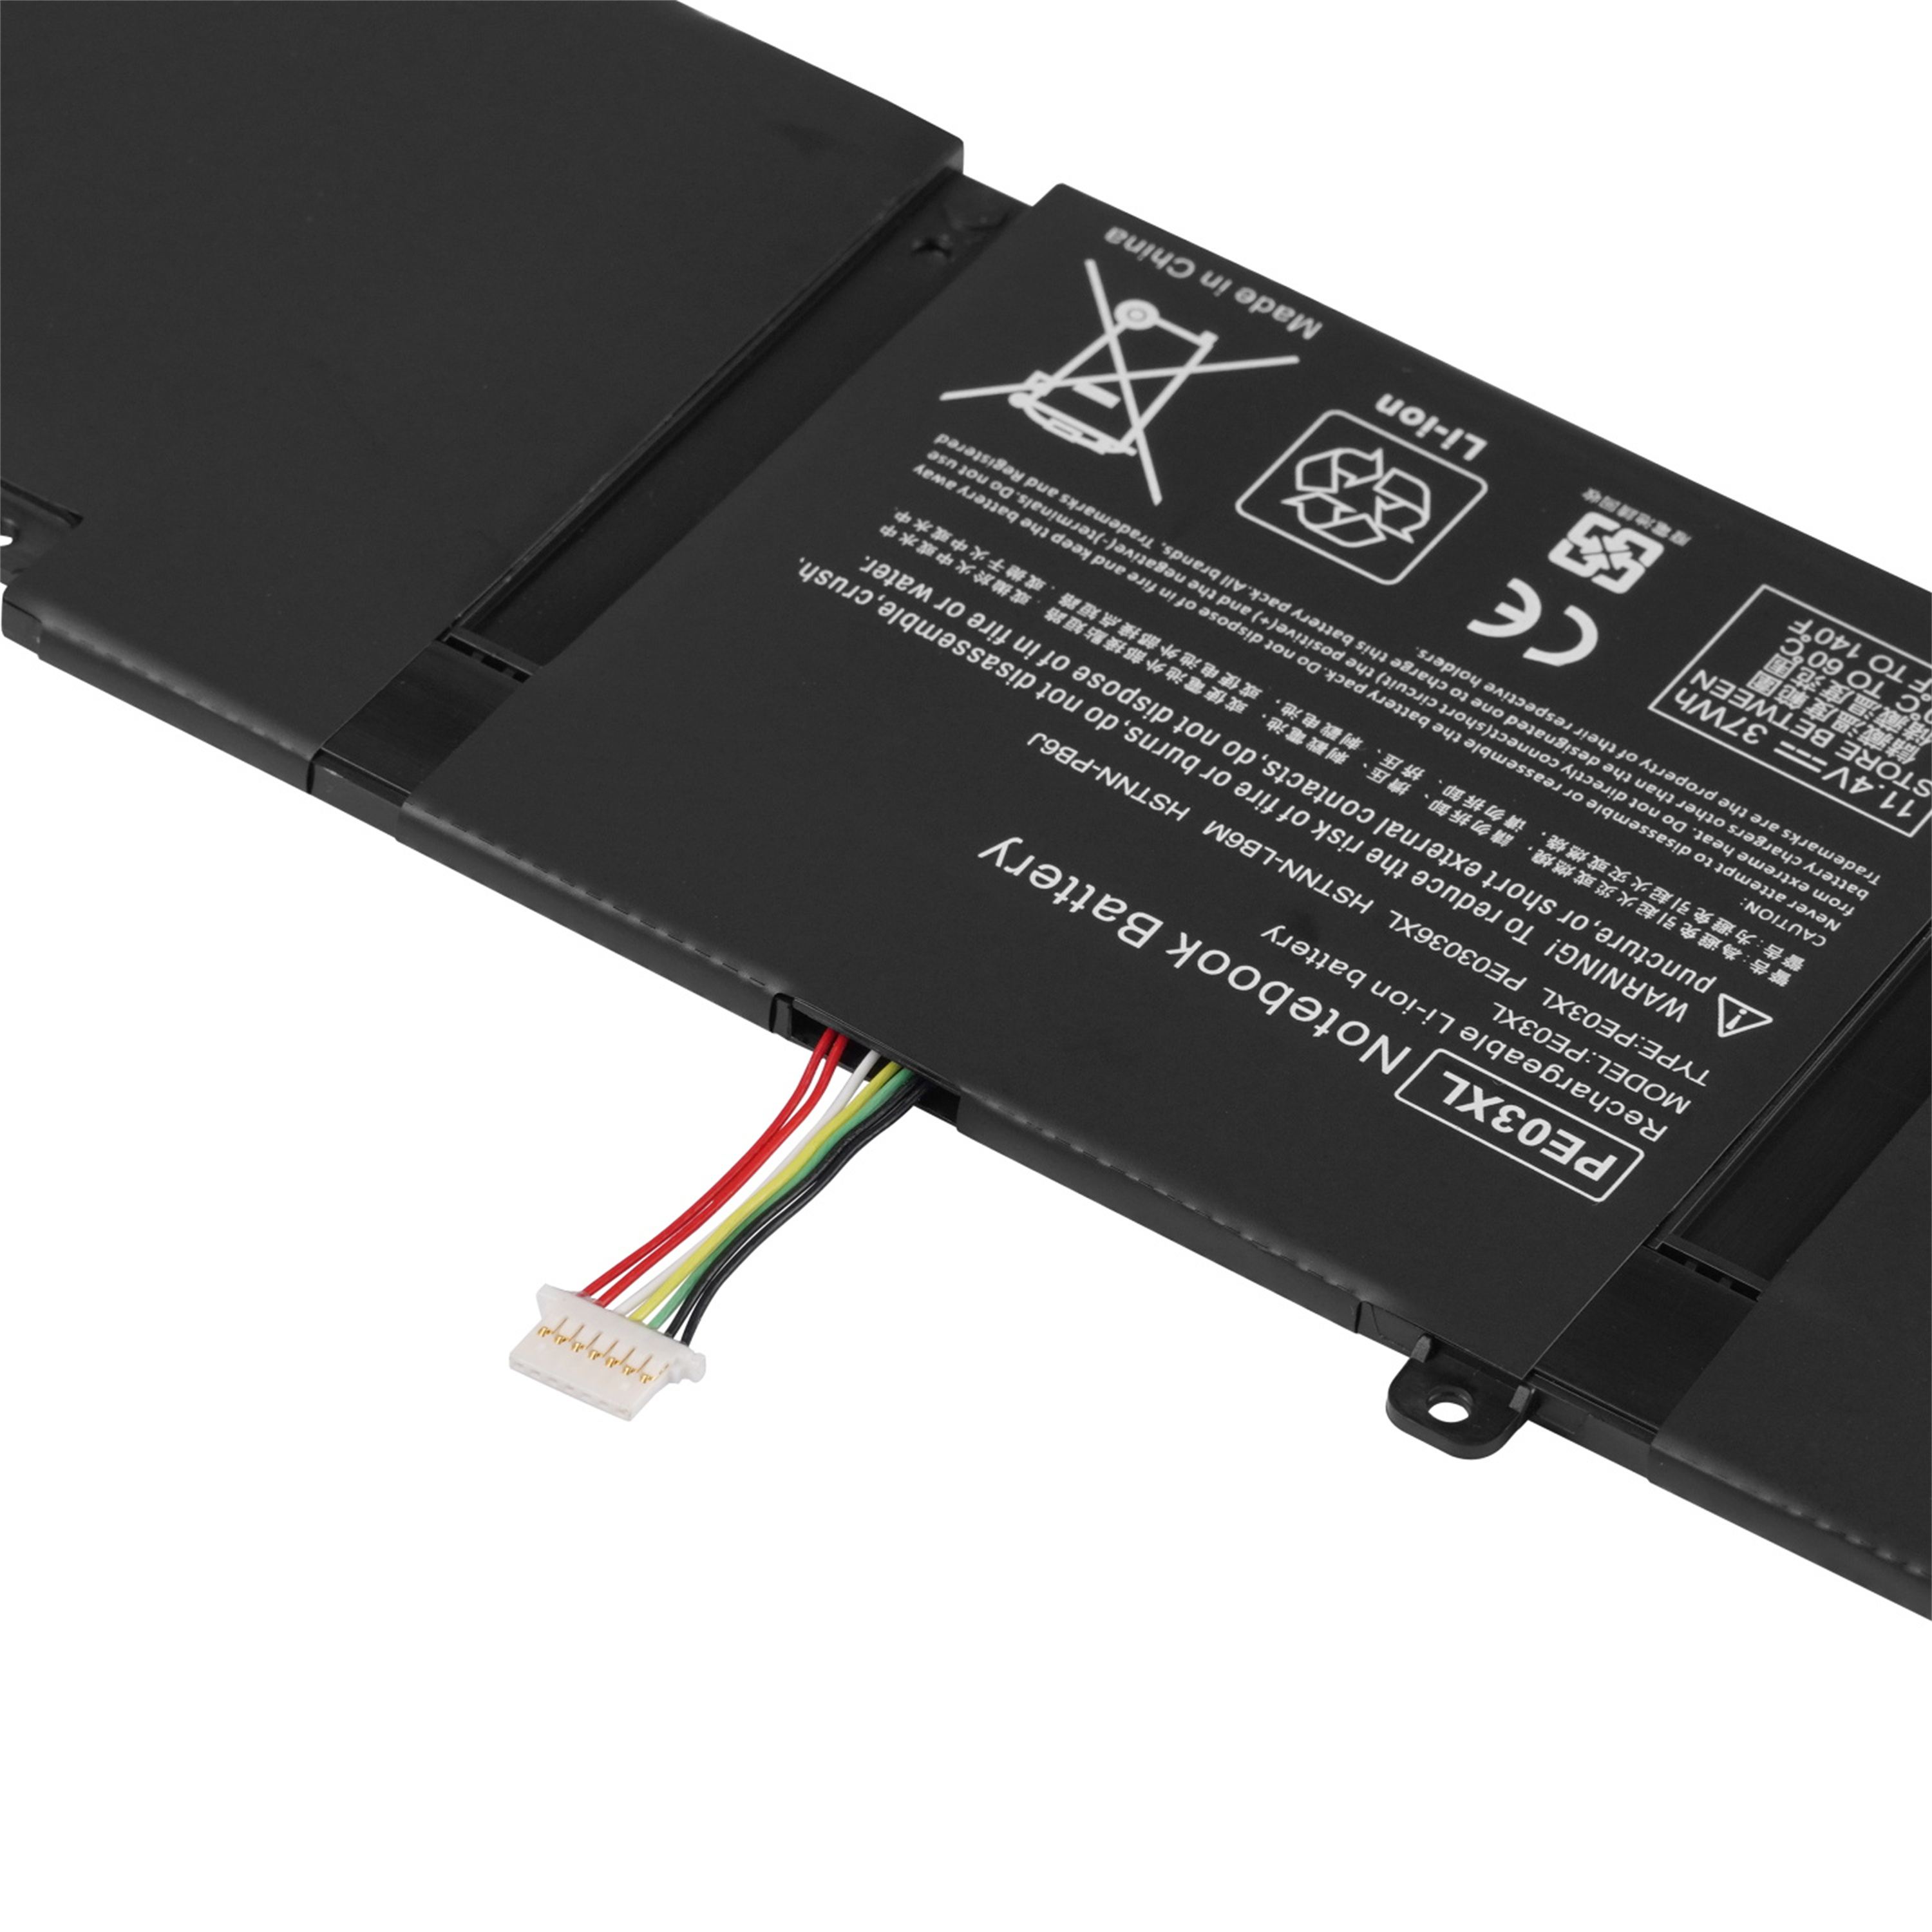 PE03XL rechargeable lithium ion Notebook battery Laptop battery for HP Chromebook 11 G1 G3 G4 767068-005 766801-42111.4V 37Wh 3cell